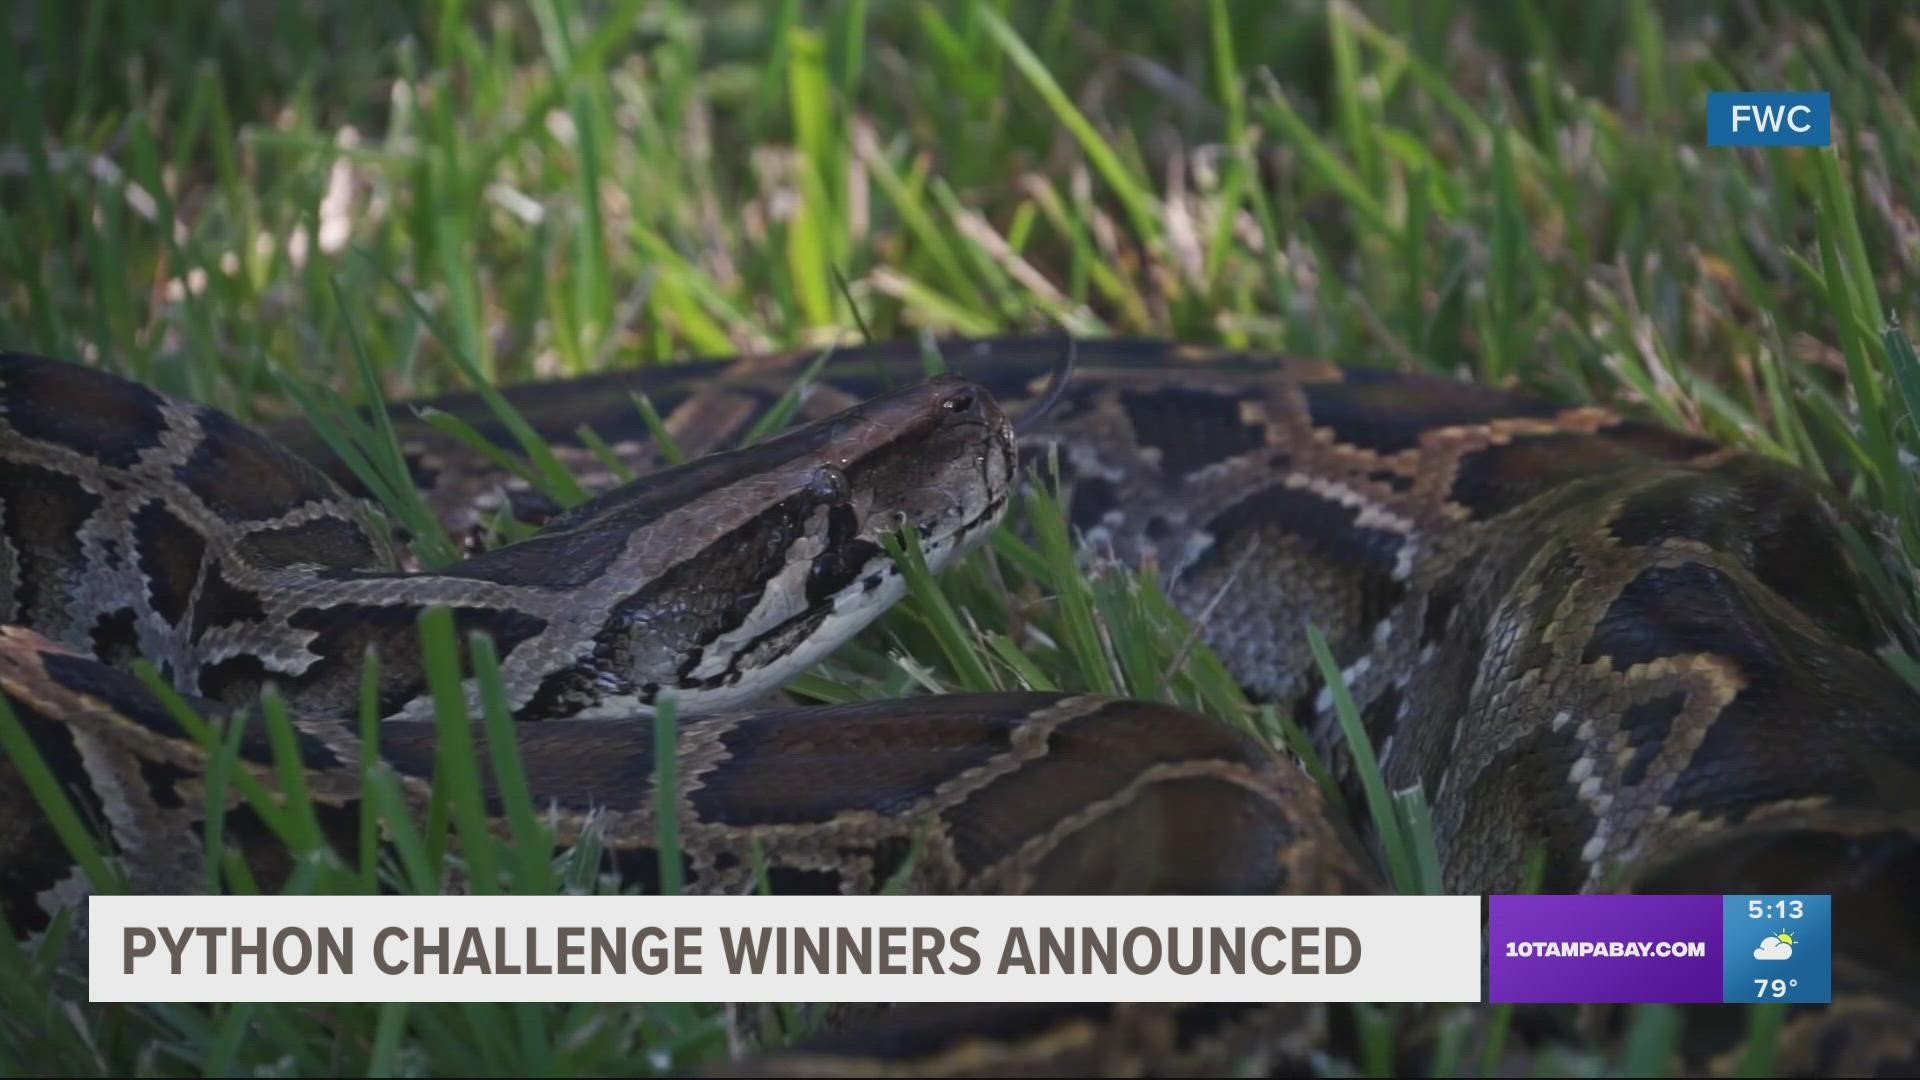 Nearly 1,000 people helped remove 231 invasive Burmese pythons during the 10-day competition.